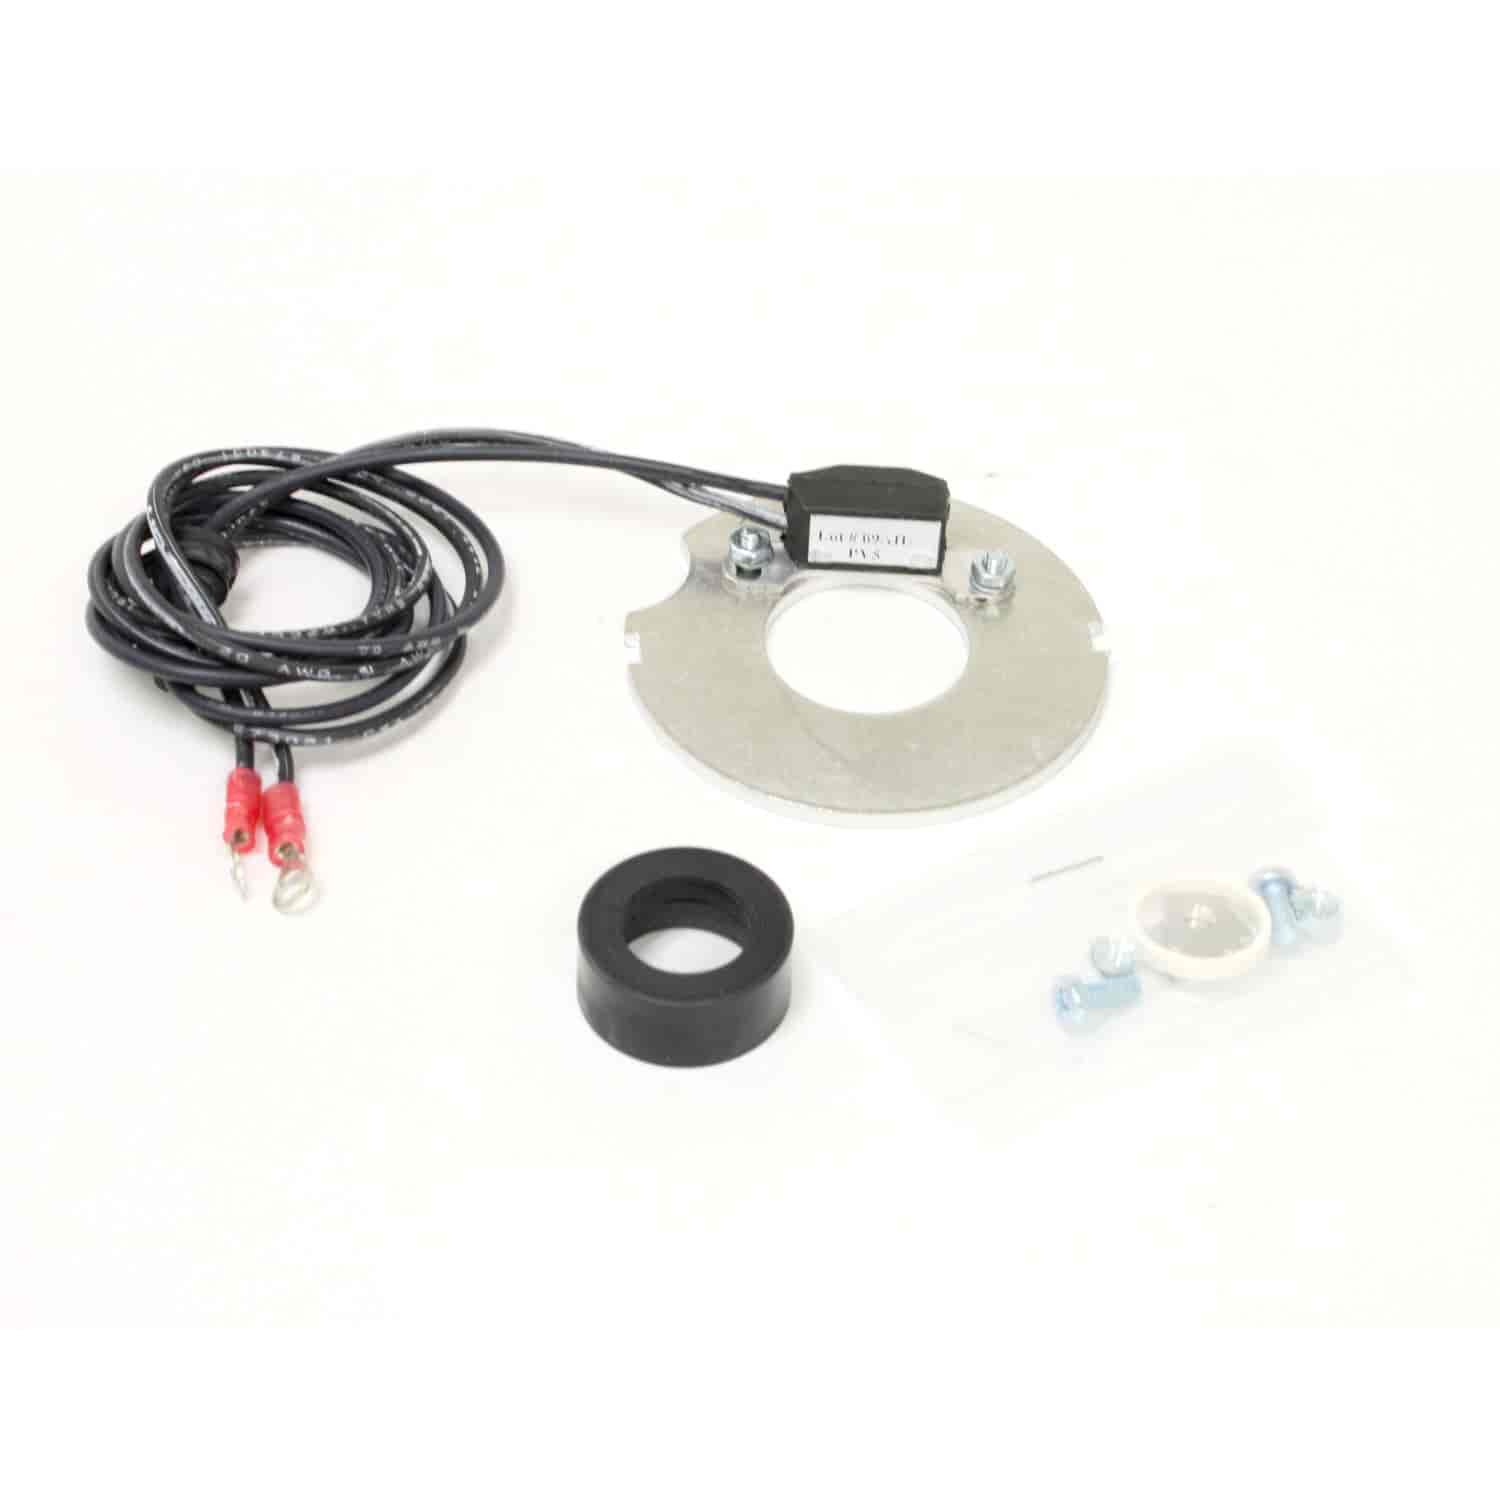 Ignitor Electronic Ignition Conversion Kit for ROLLS ROYCE 6-cylinder Dual Point 12V POS